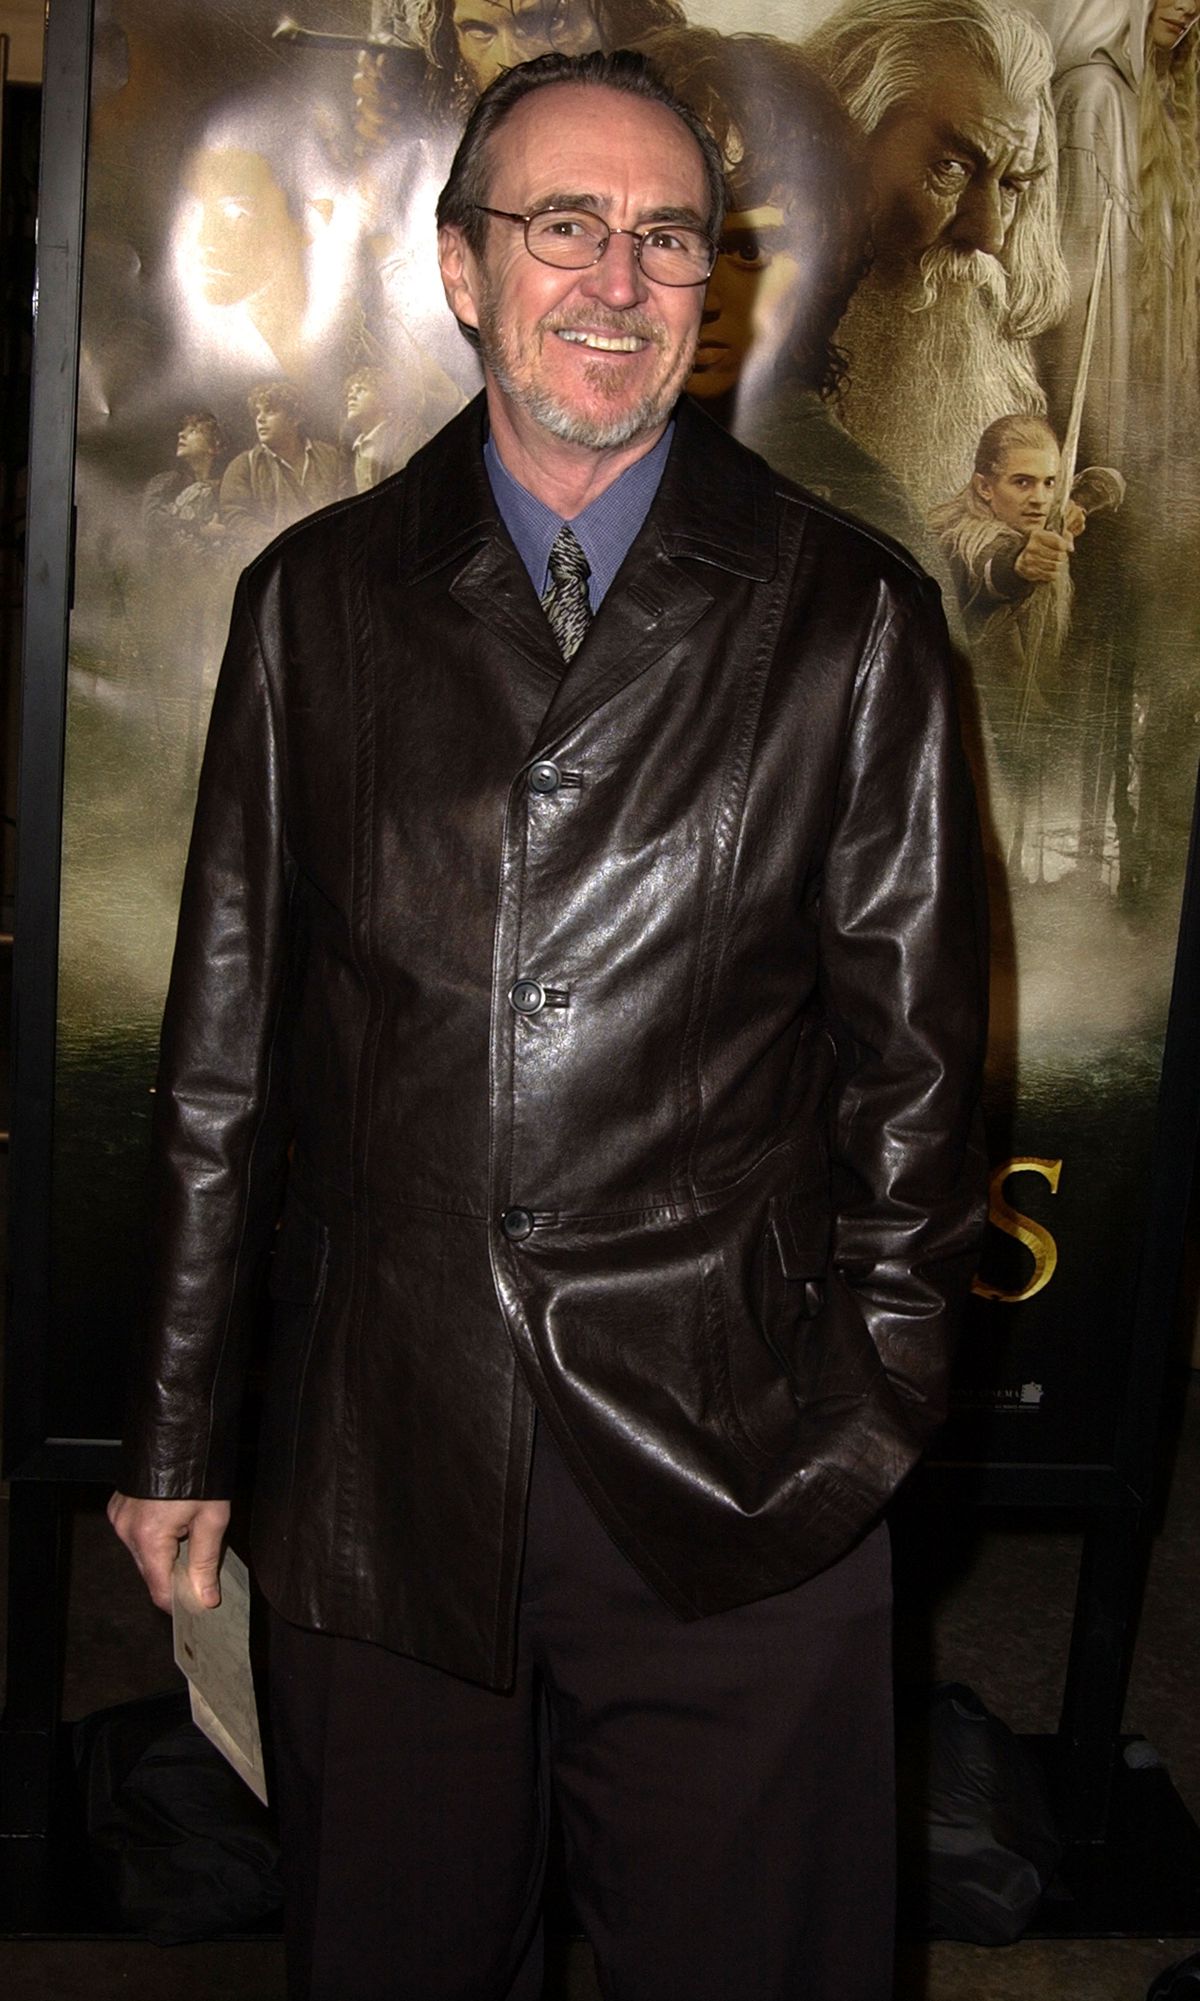 Wes Craven on the red carpet at the Los Angeles premiere of The Lord of the Rings: The Fellowship of the Ring